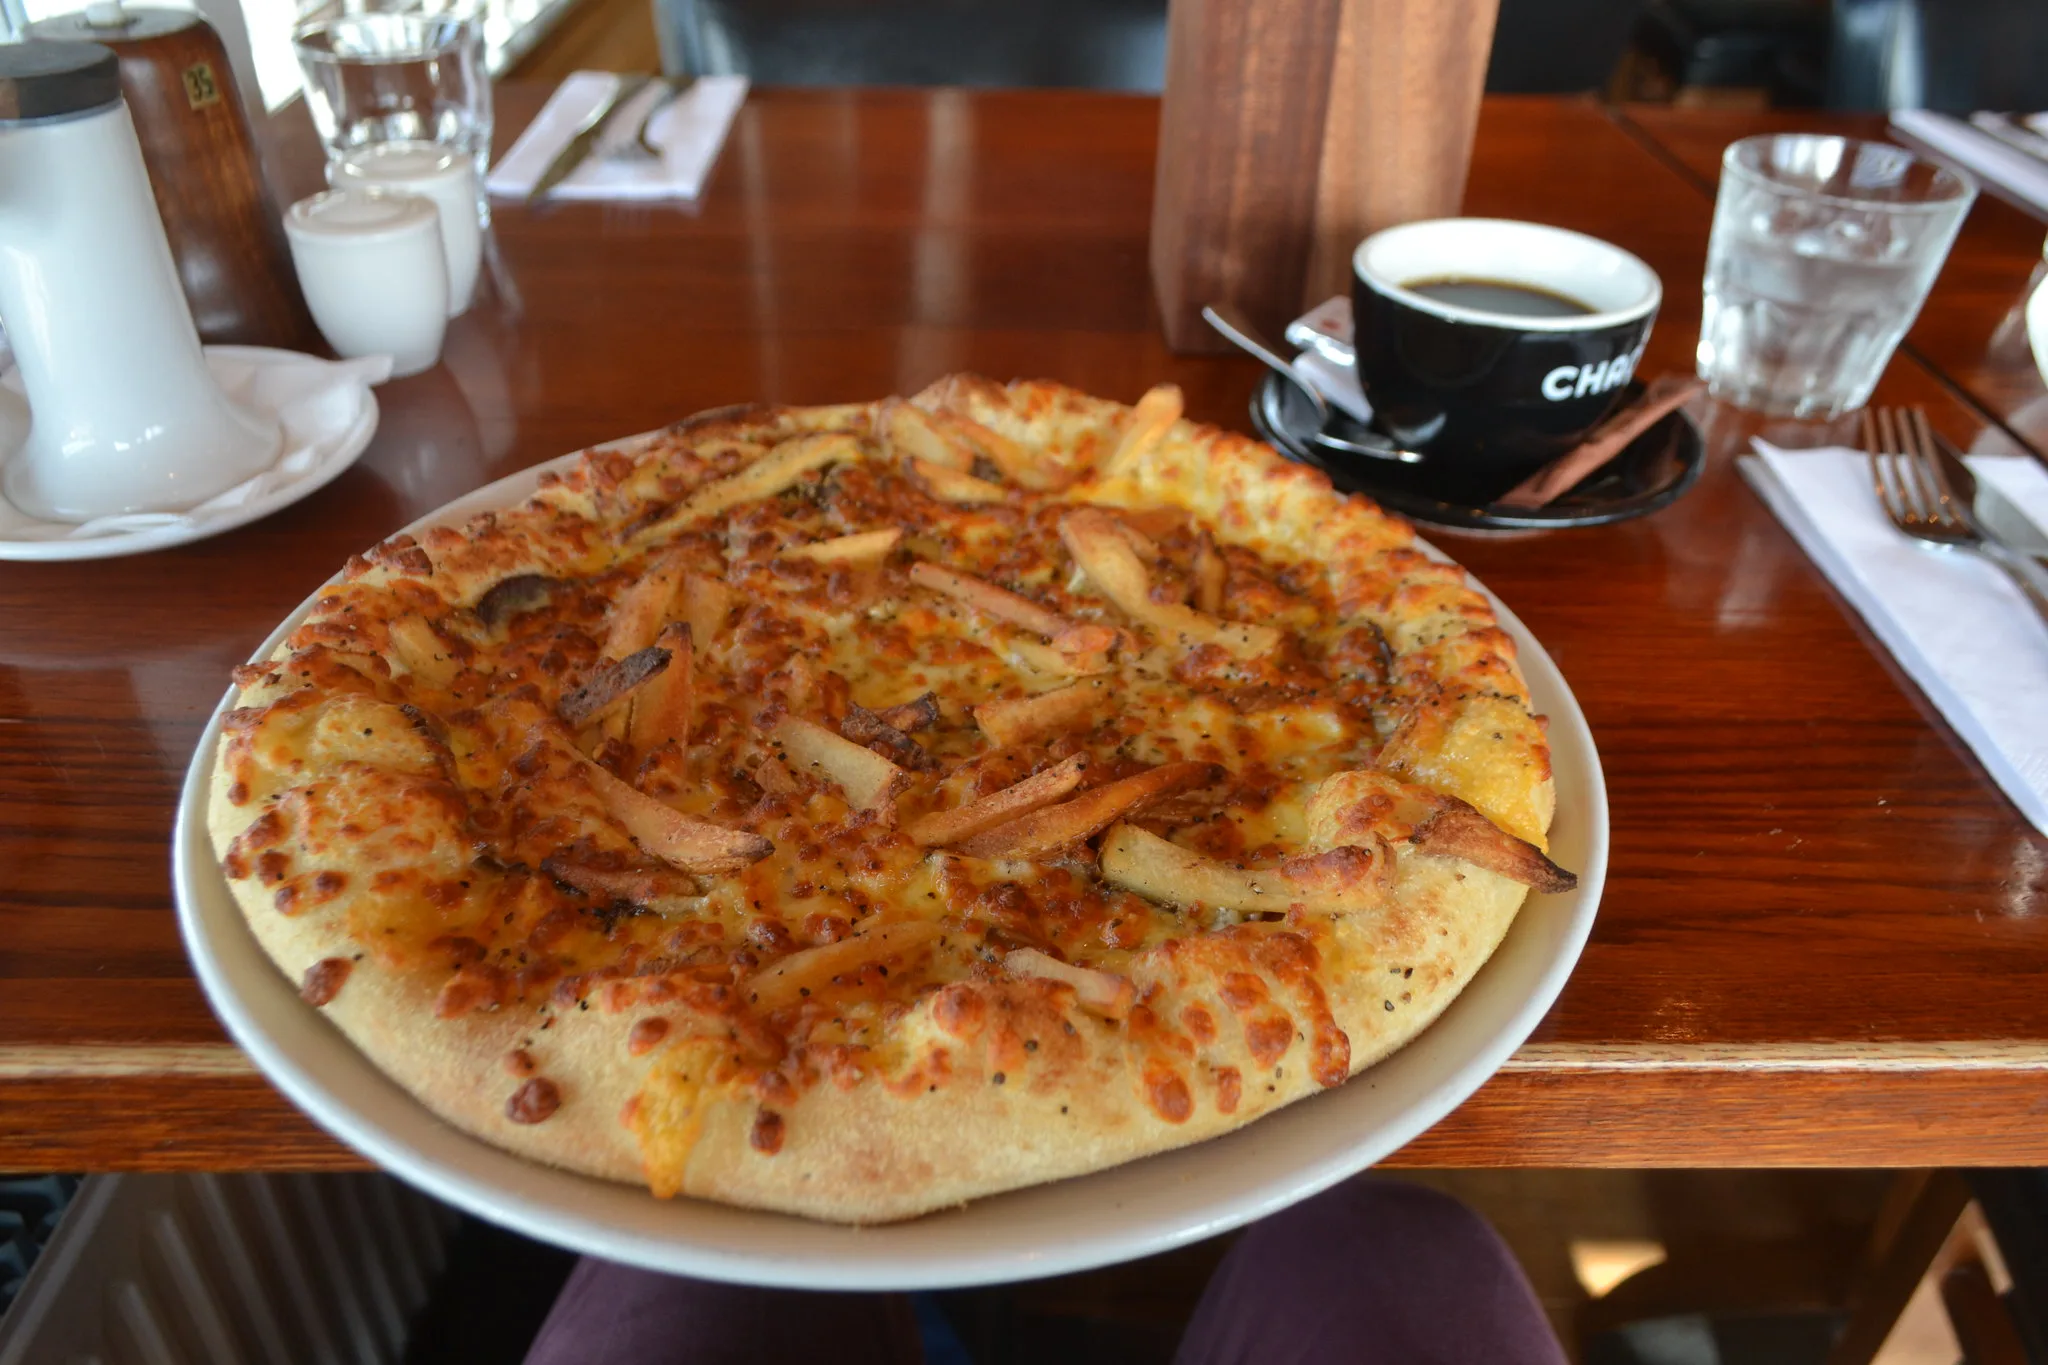 A serving of well-done Pizza Nautabanans with coffee at Greifinn, one of the best restaurants in Iceland